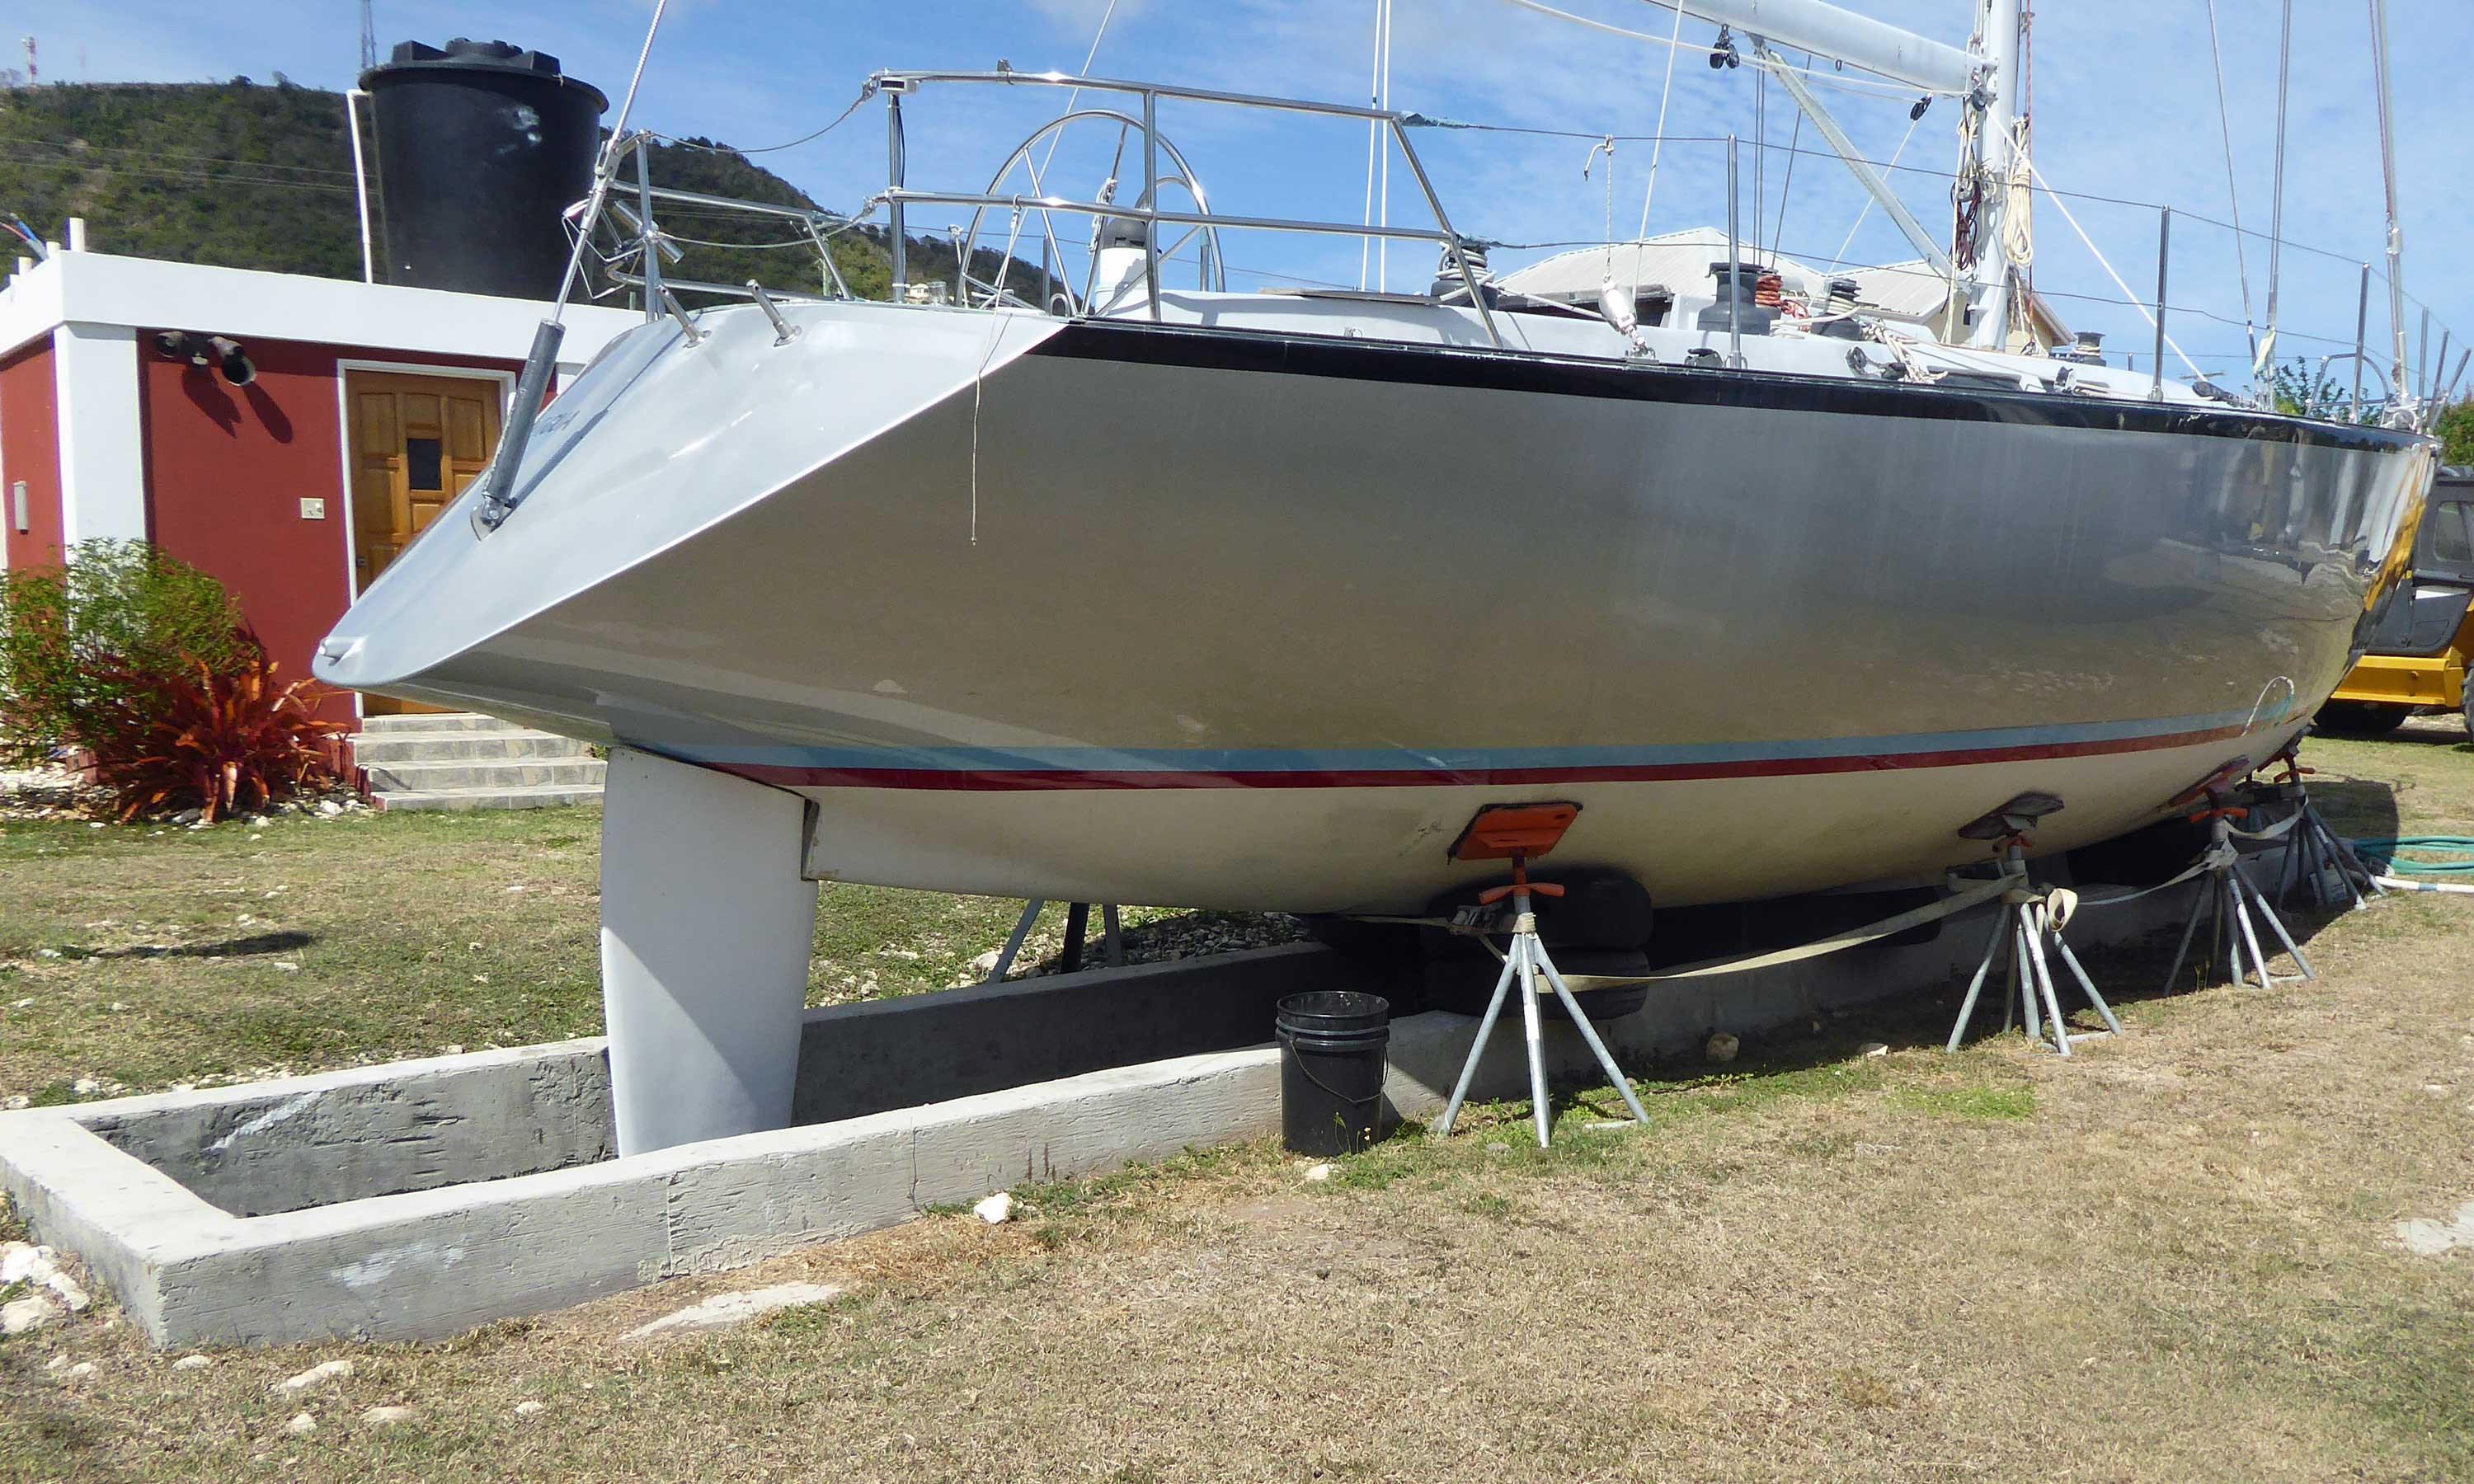 The Caribbean Hurricane Season can be an anxious time for boat owners. These boatyards are set up to provide maximum protection from these violent storms.